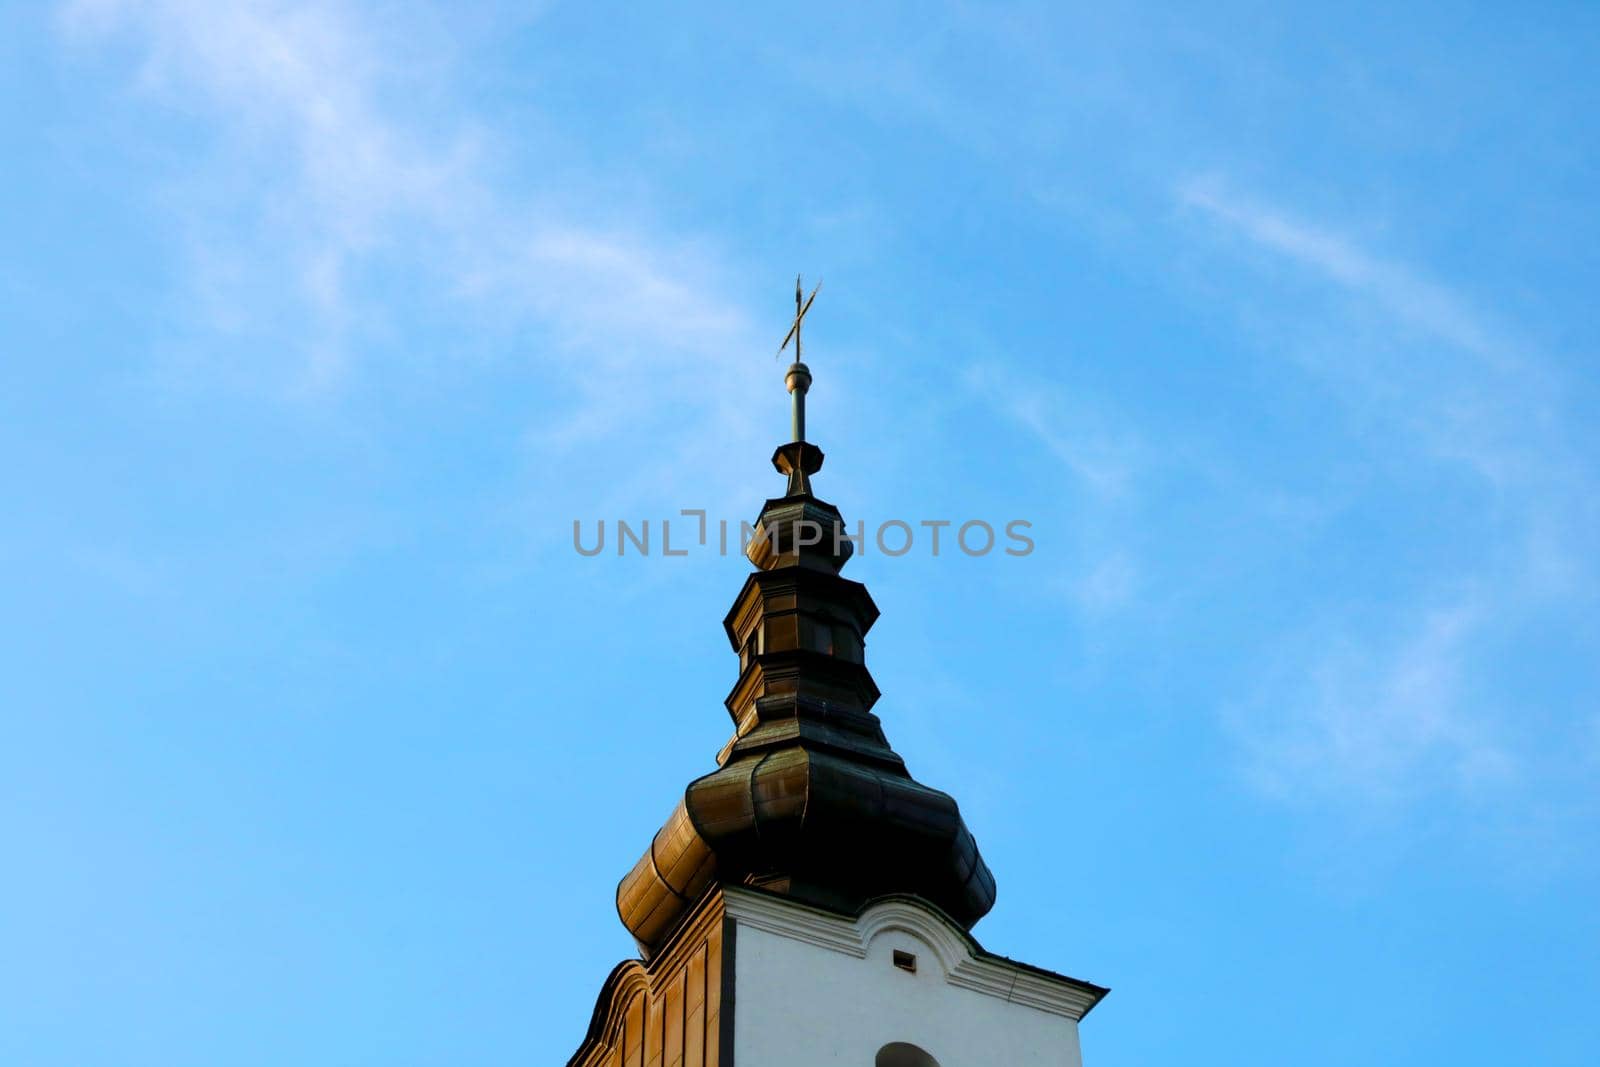 The old dome of the church against the blue sky. by kip02kas